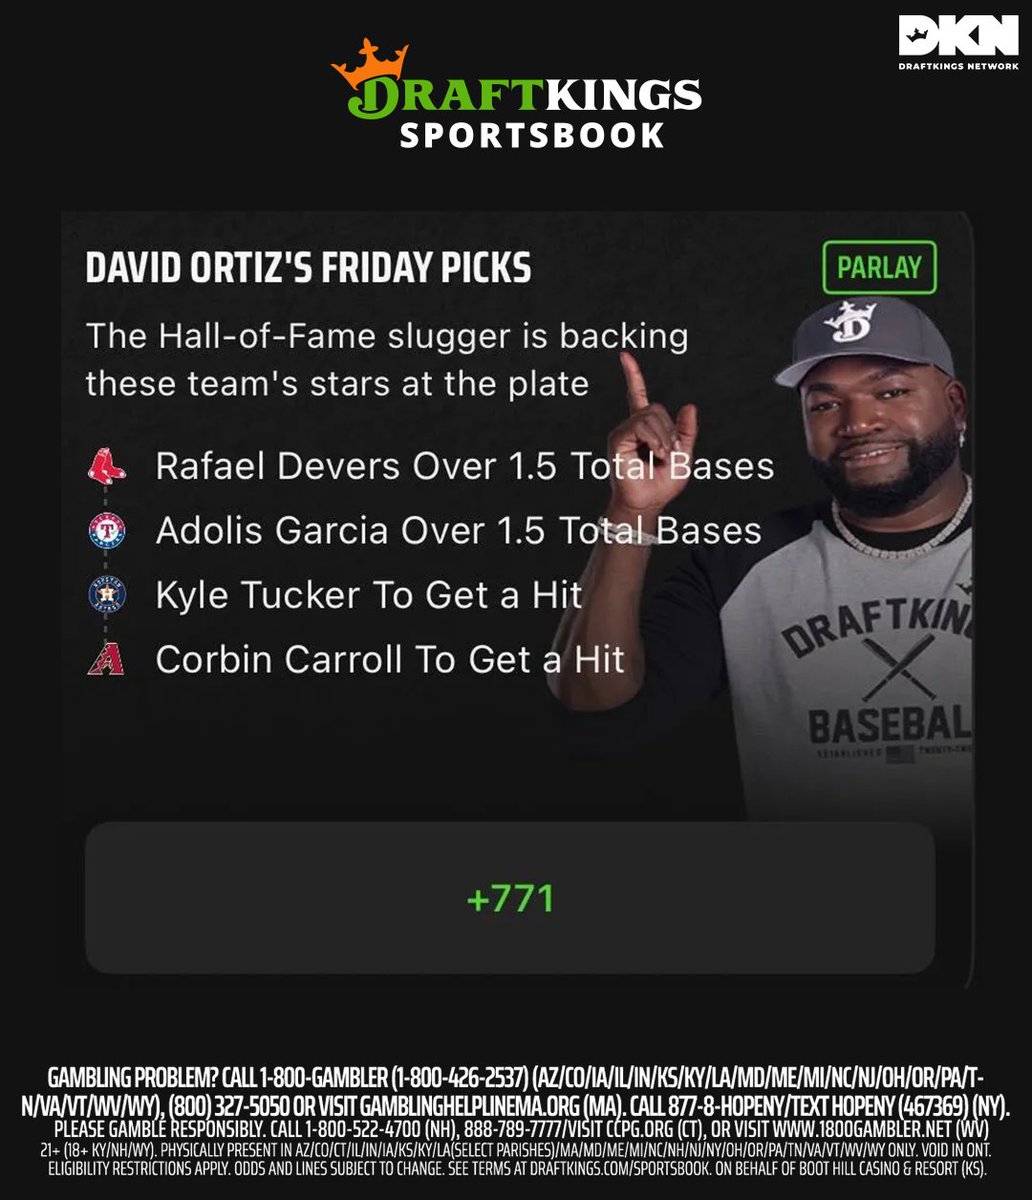 MLB PARLAY: @davidortiz gives his top parlay bet on @DKSportsbook for today’s MLB betting card, check it out!👇 ⚾Rafael Devers Over 1.5 Total Bases ⚾Adolis Garcia Over 1.5 Total Bases ⚾Kyle Tucker To Get a Hit ⚾Corbin Carroll To Get a Hit Odds (+771)